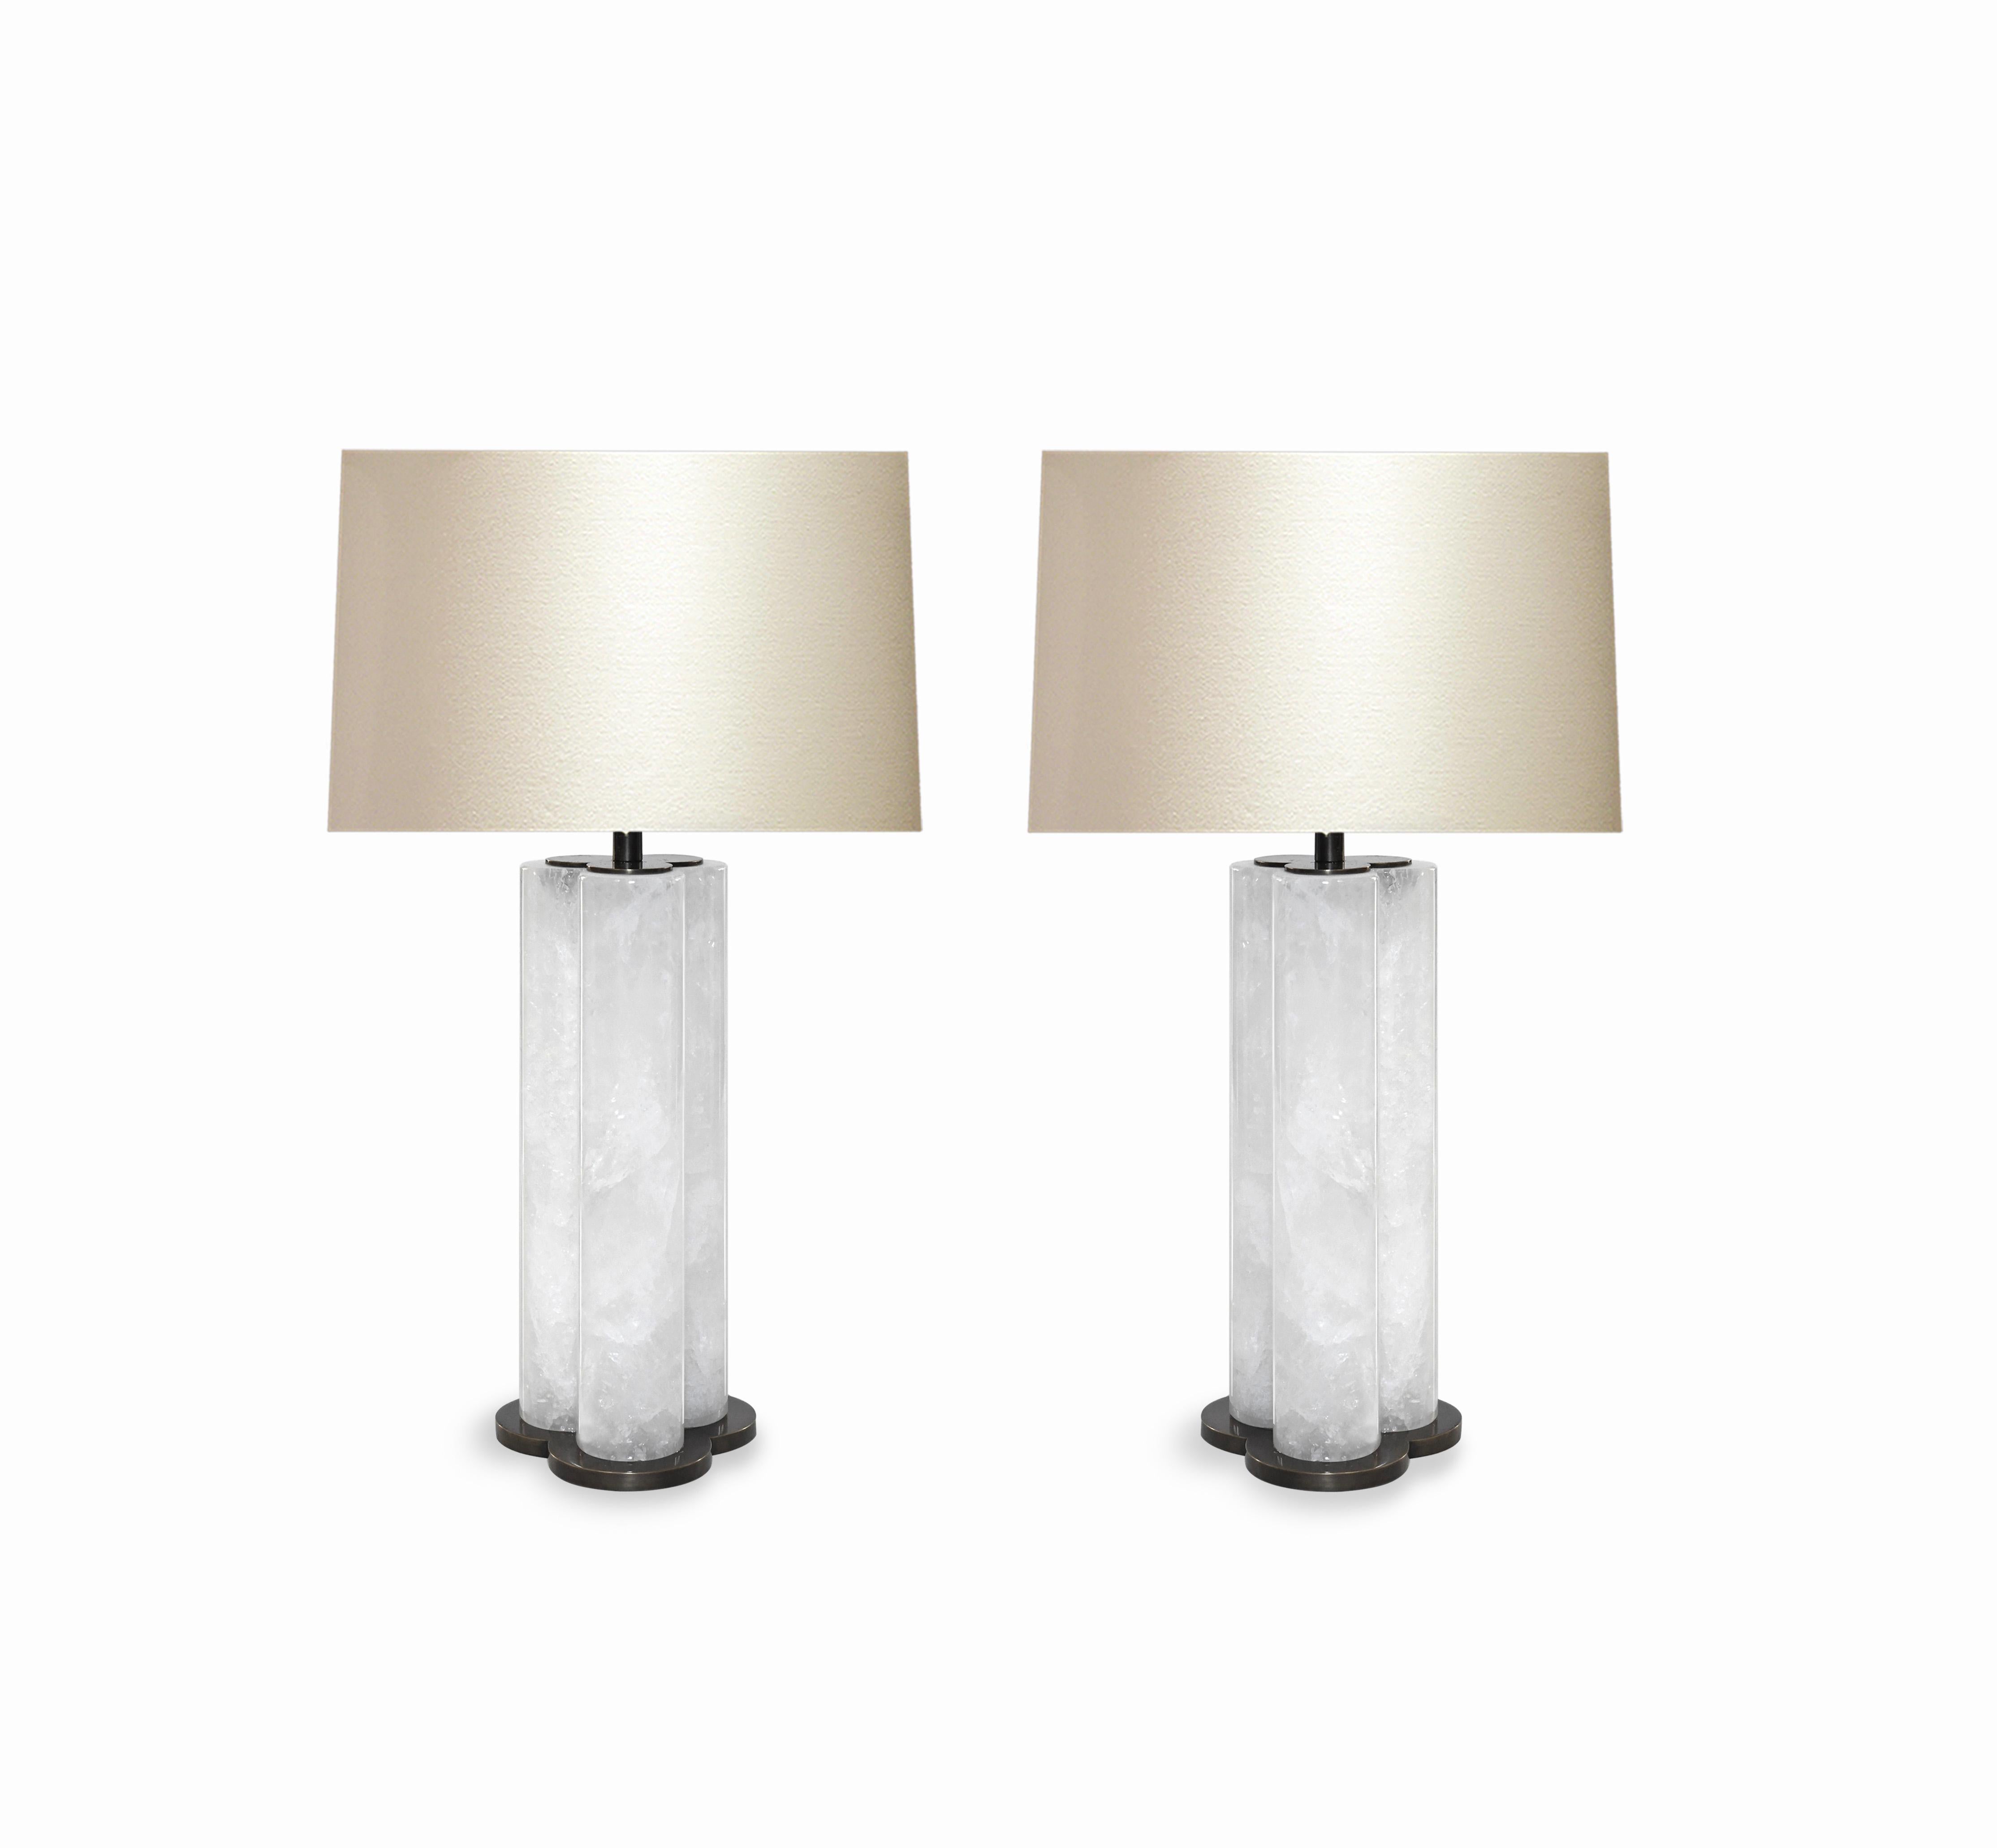 Pair of tri-column rock crystal quartz lamps with antique brass bases, created by Phoenix gallery, NYC.
To the top of the rock crystal: 11.75